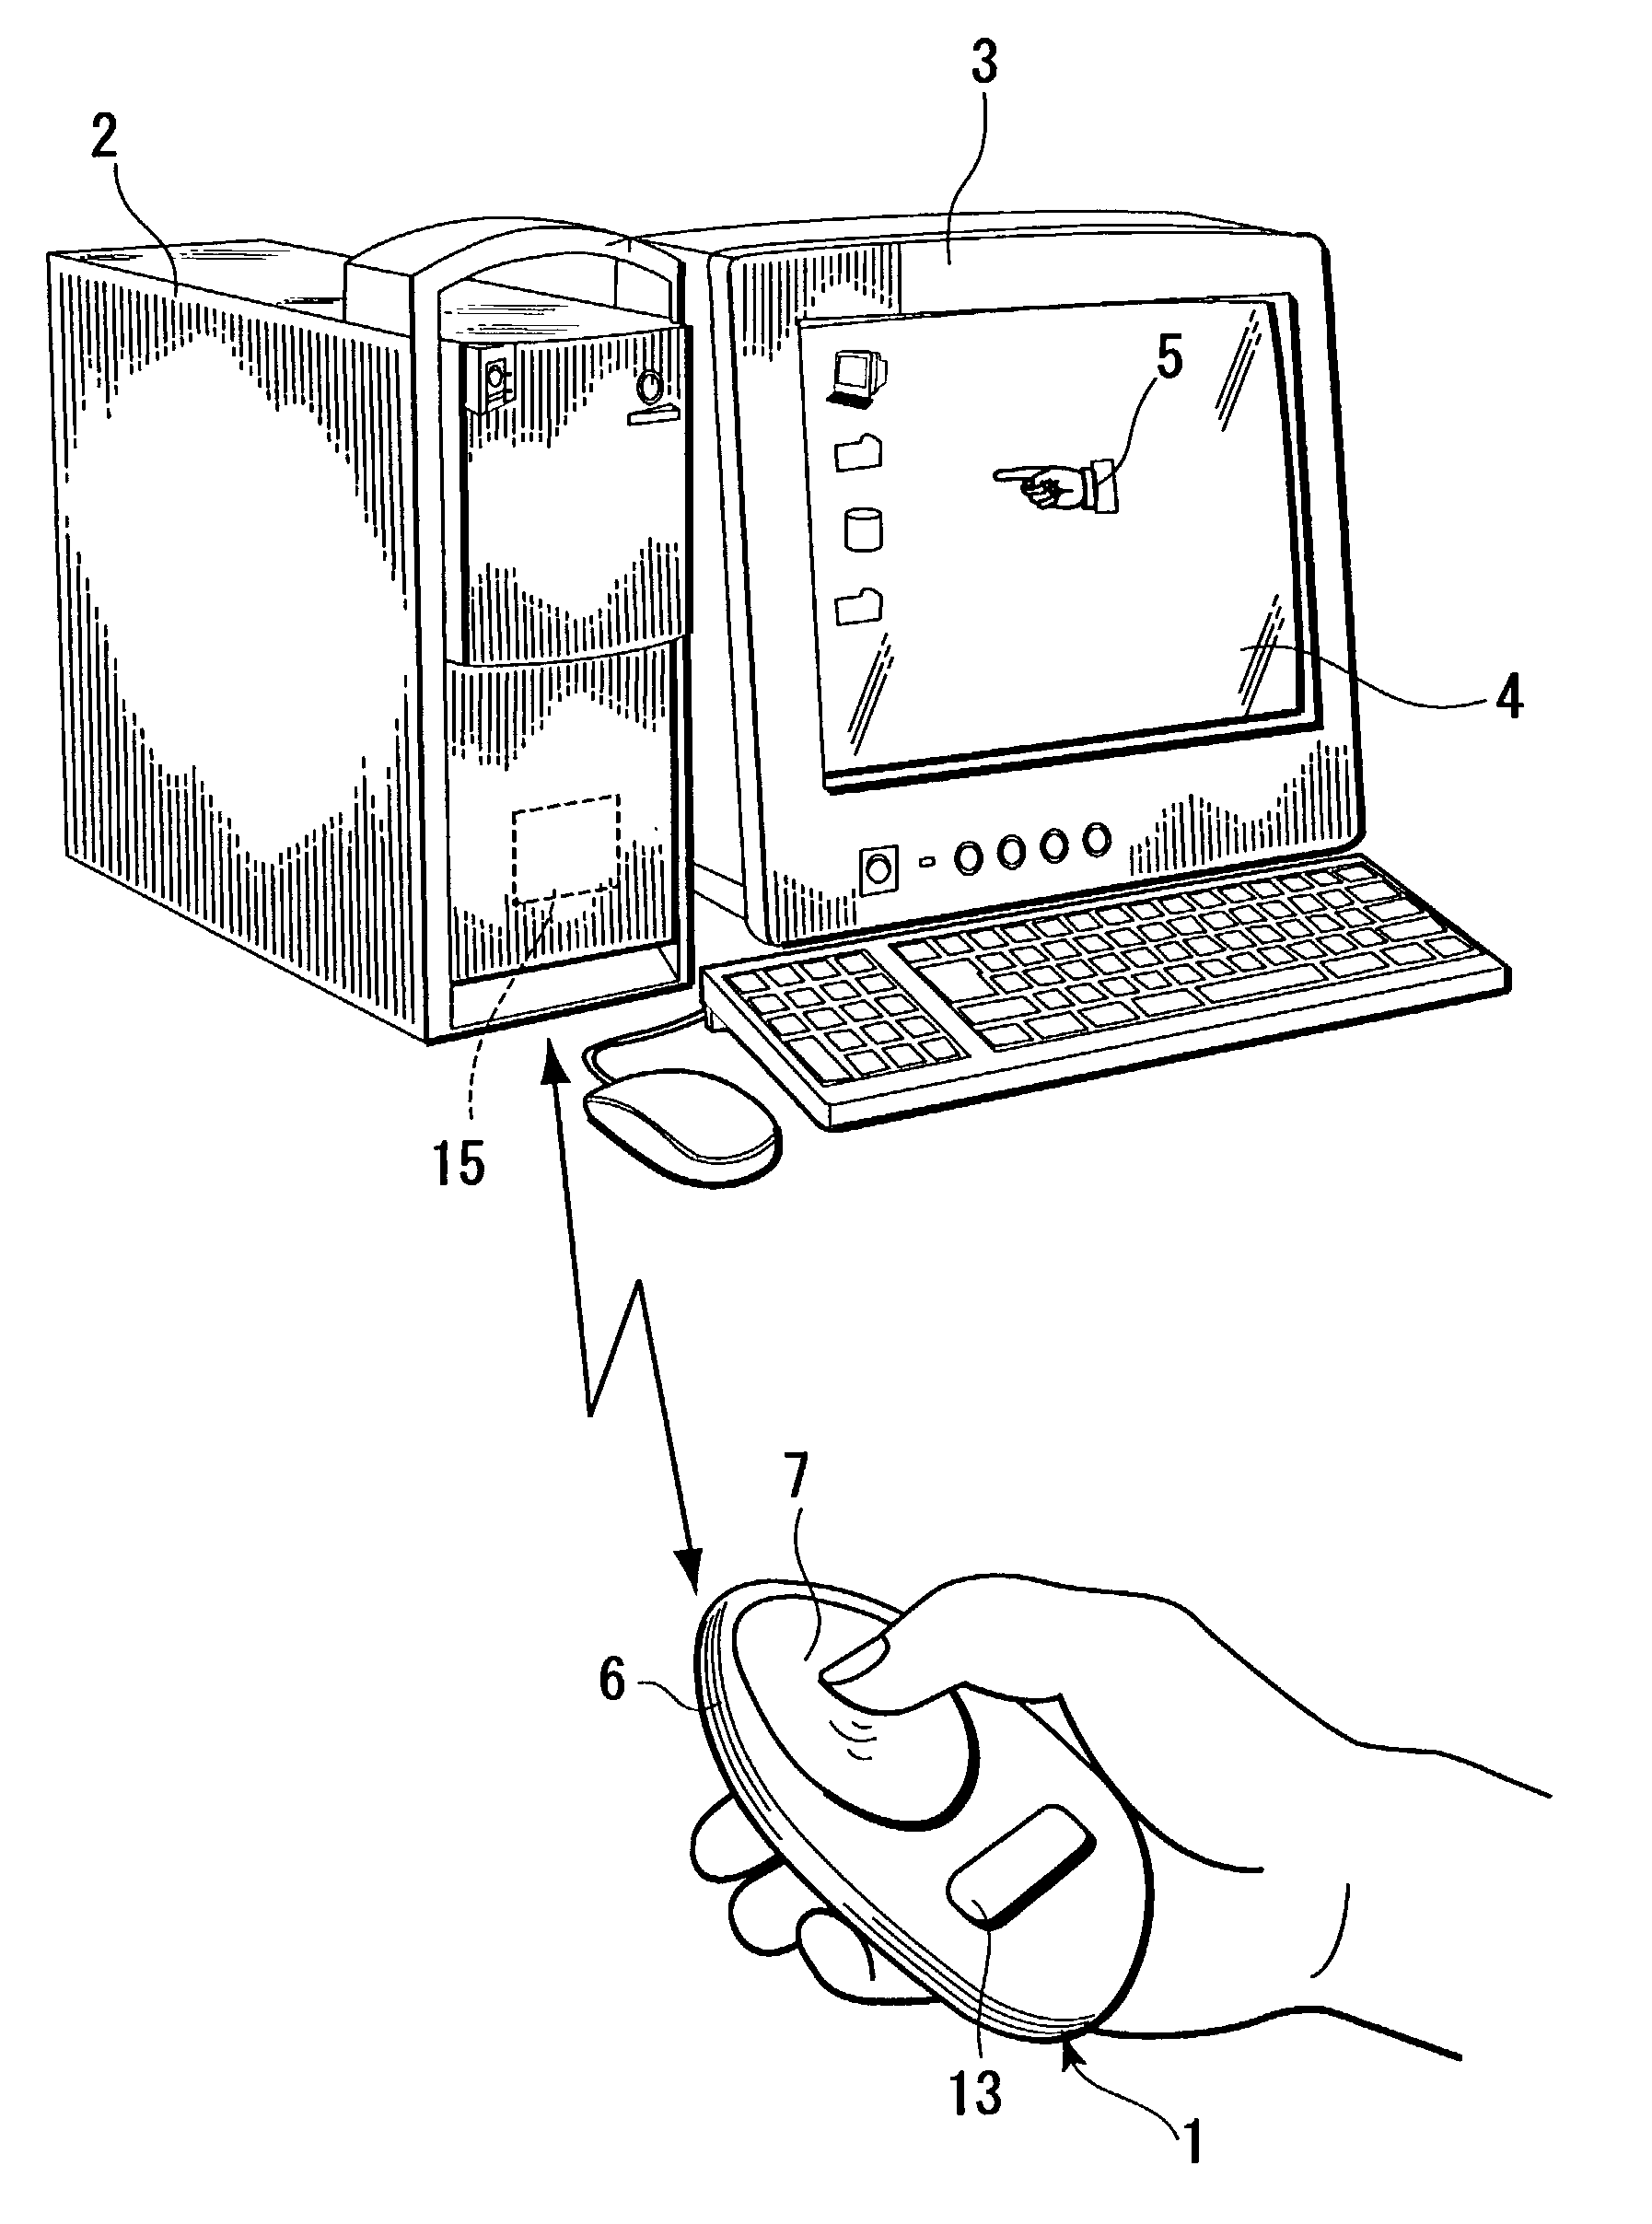 Information input device for giving input instructions to a program executing machine